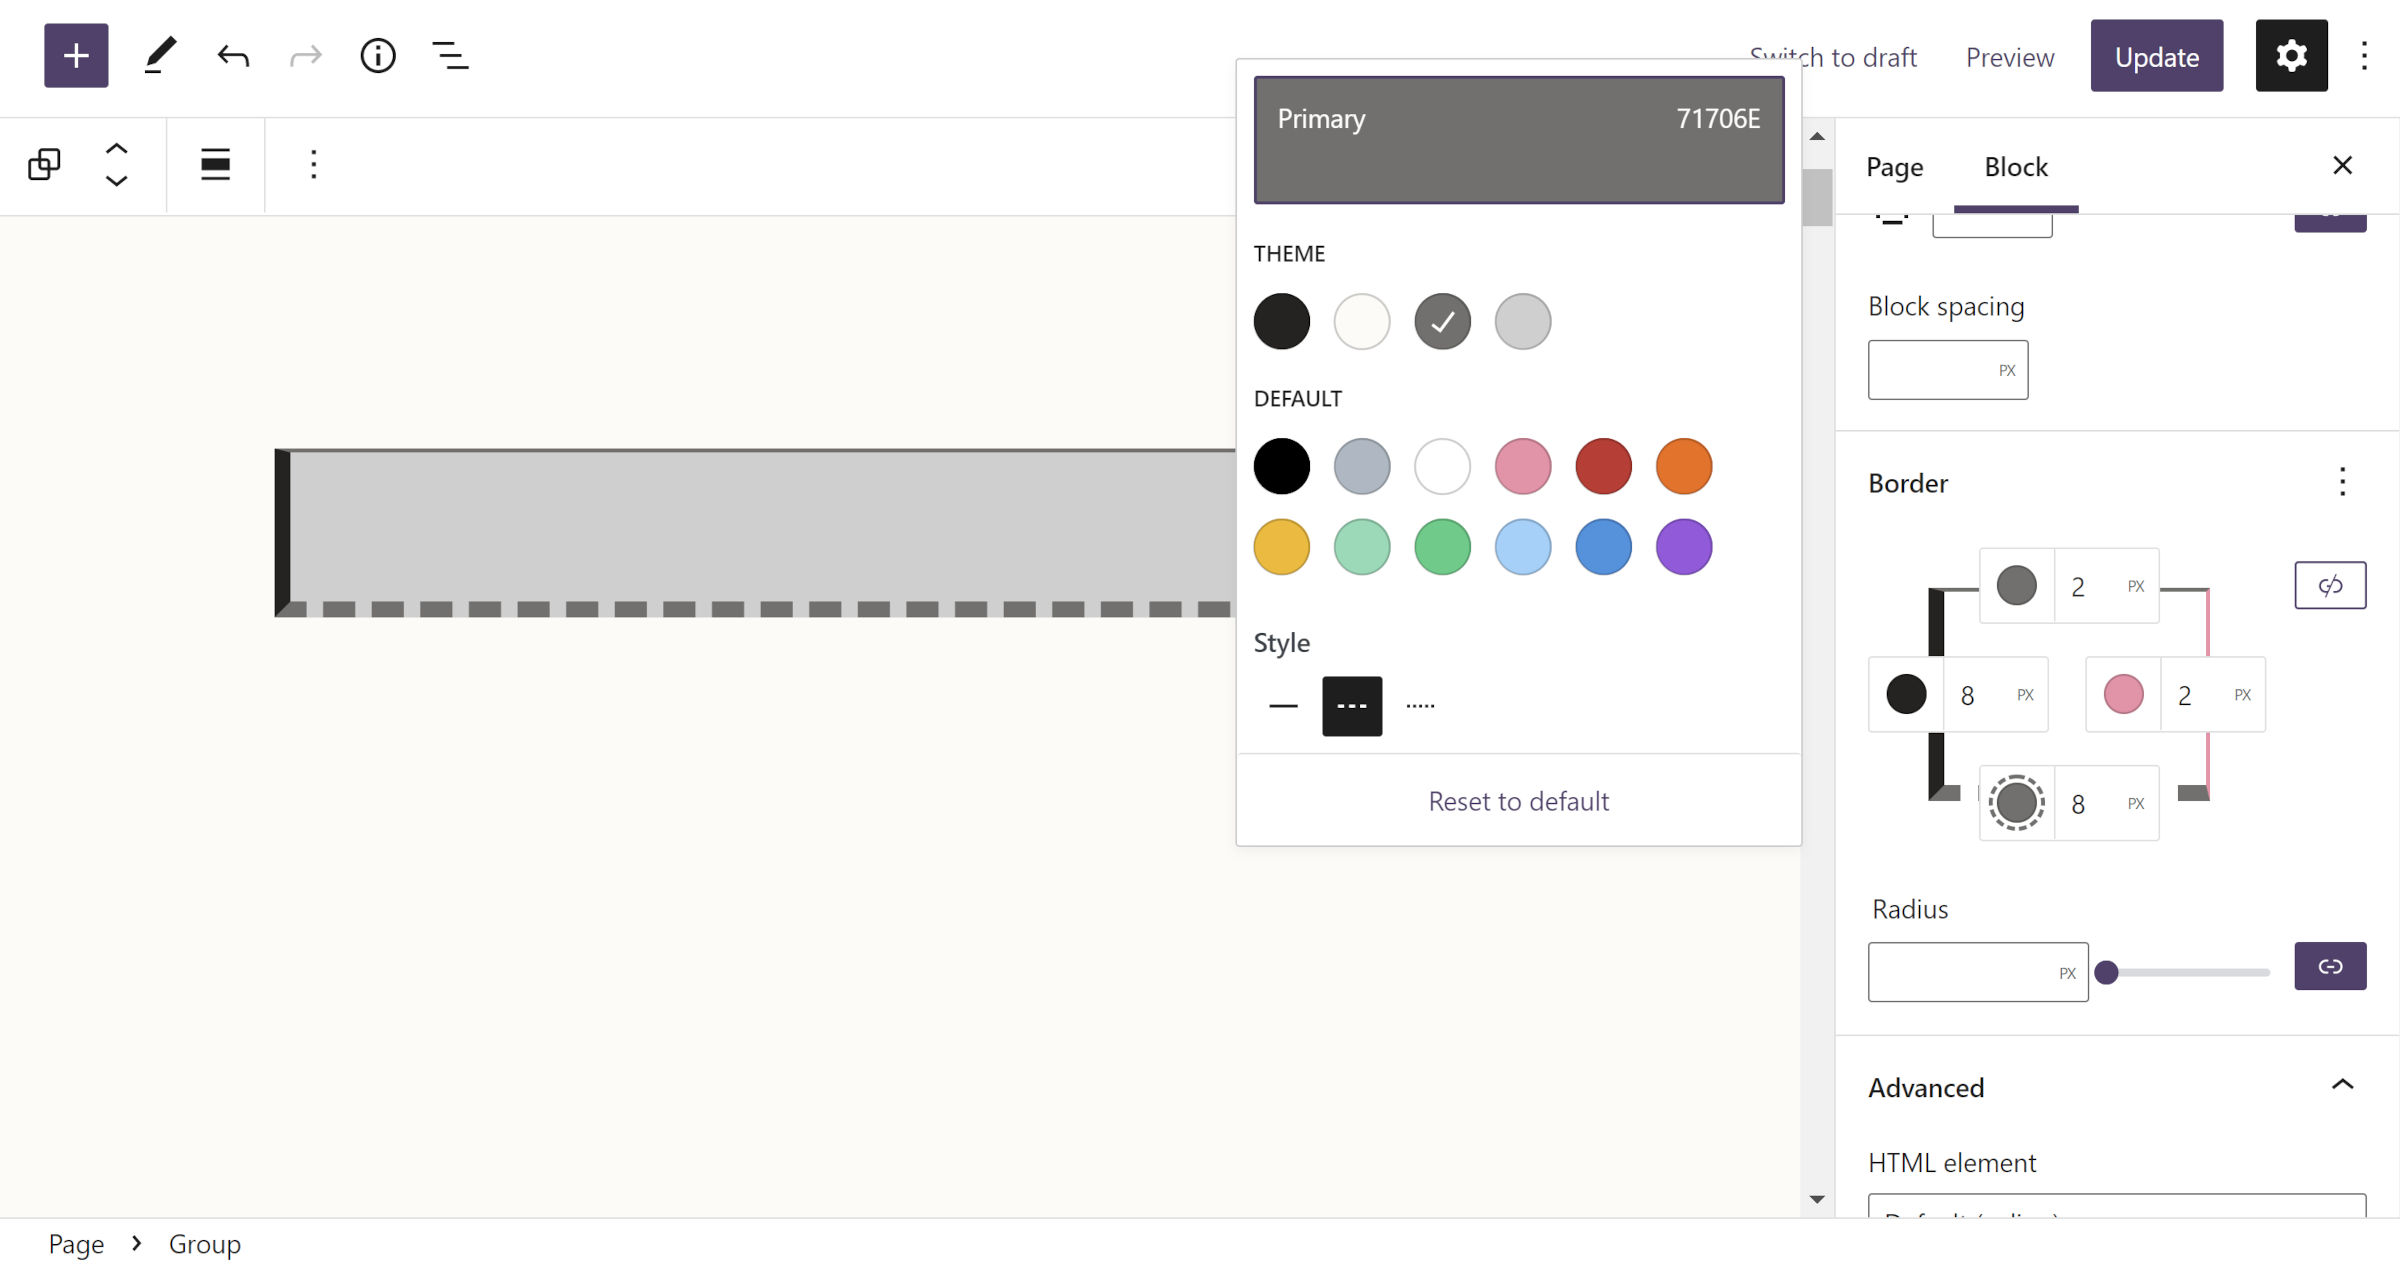 WordPress post editor with a Group block in the content canvas.  On the side, the border control is unlinked, showing options for all four sides.  There is a popover for choosing the color of one side and its style.